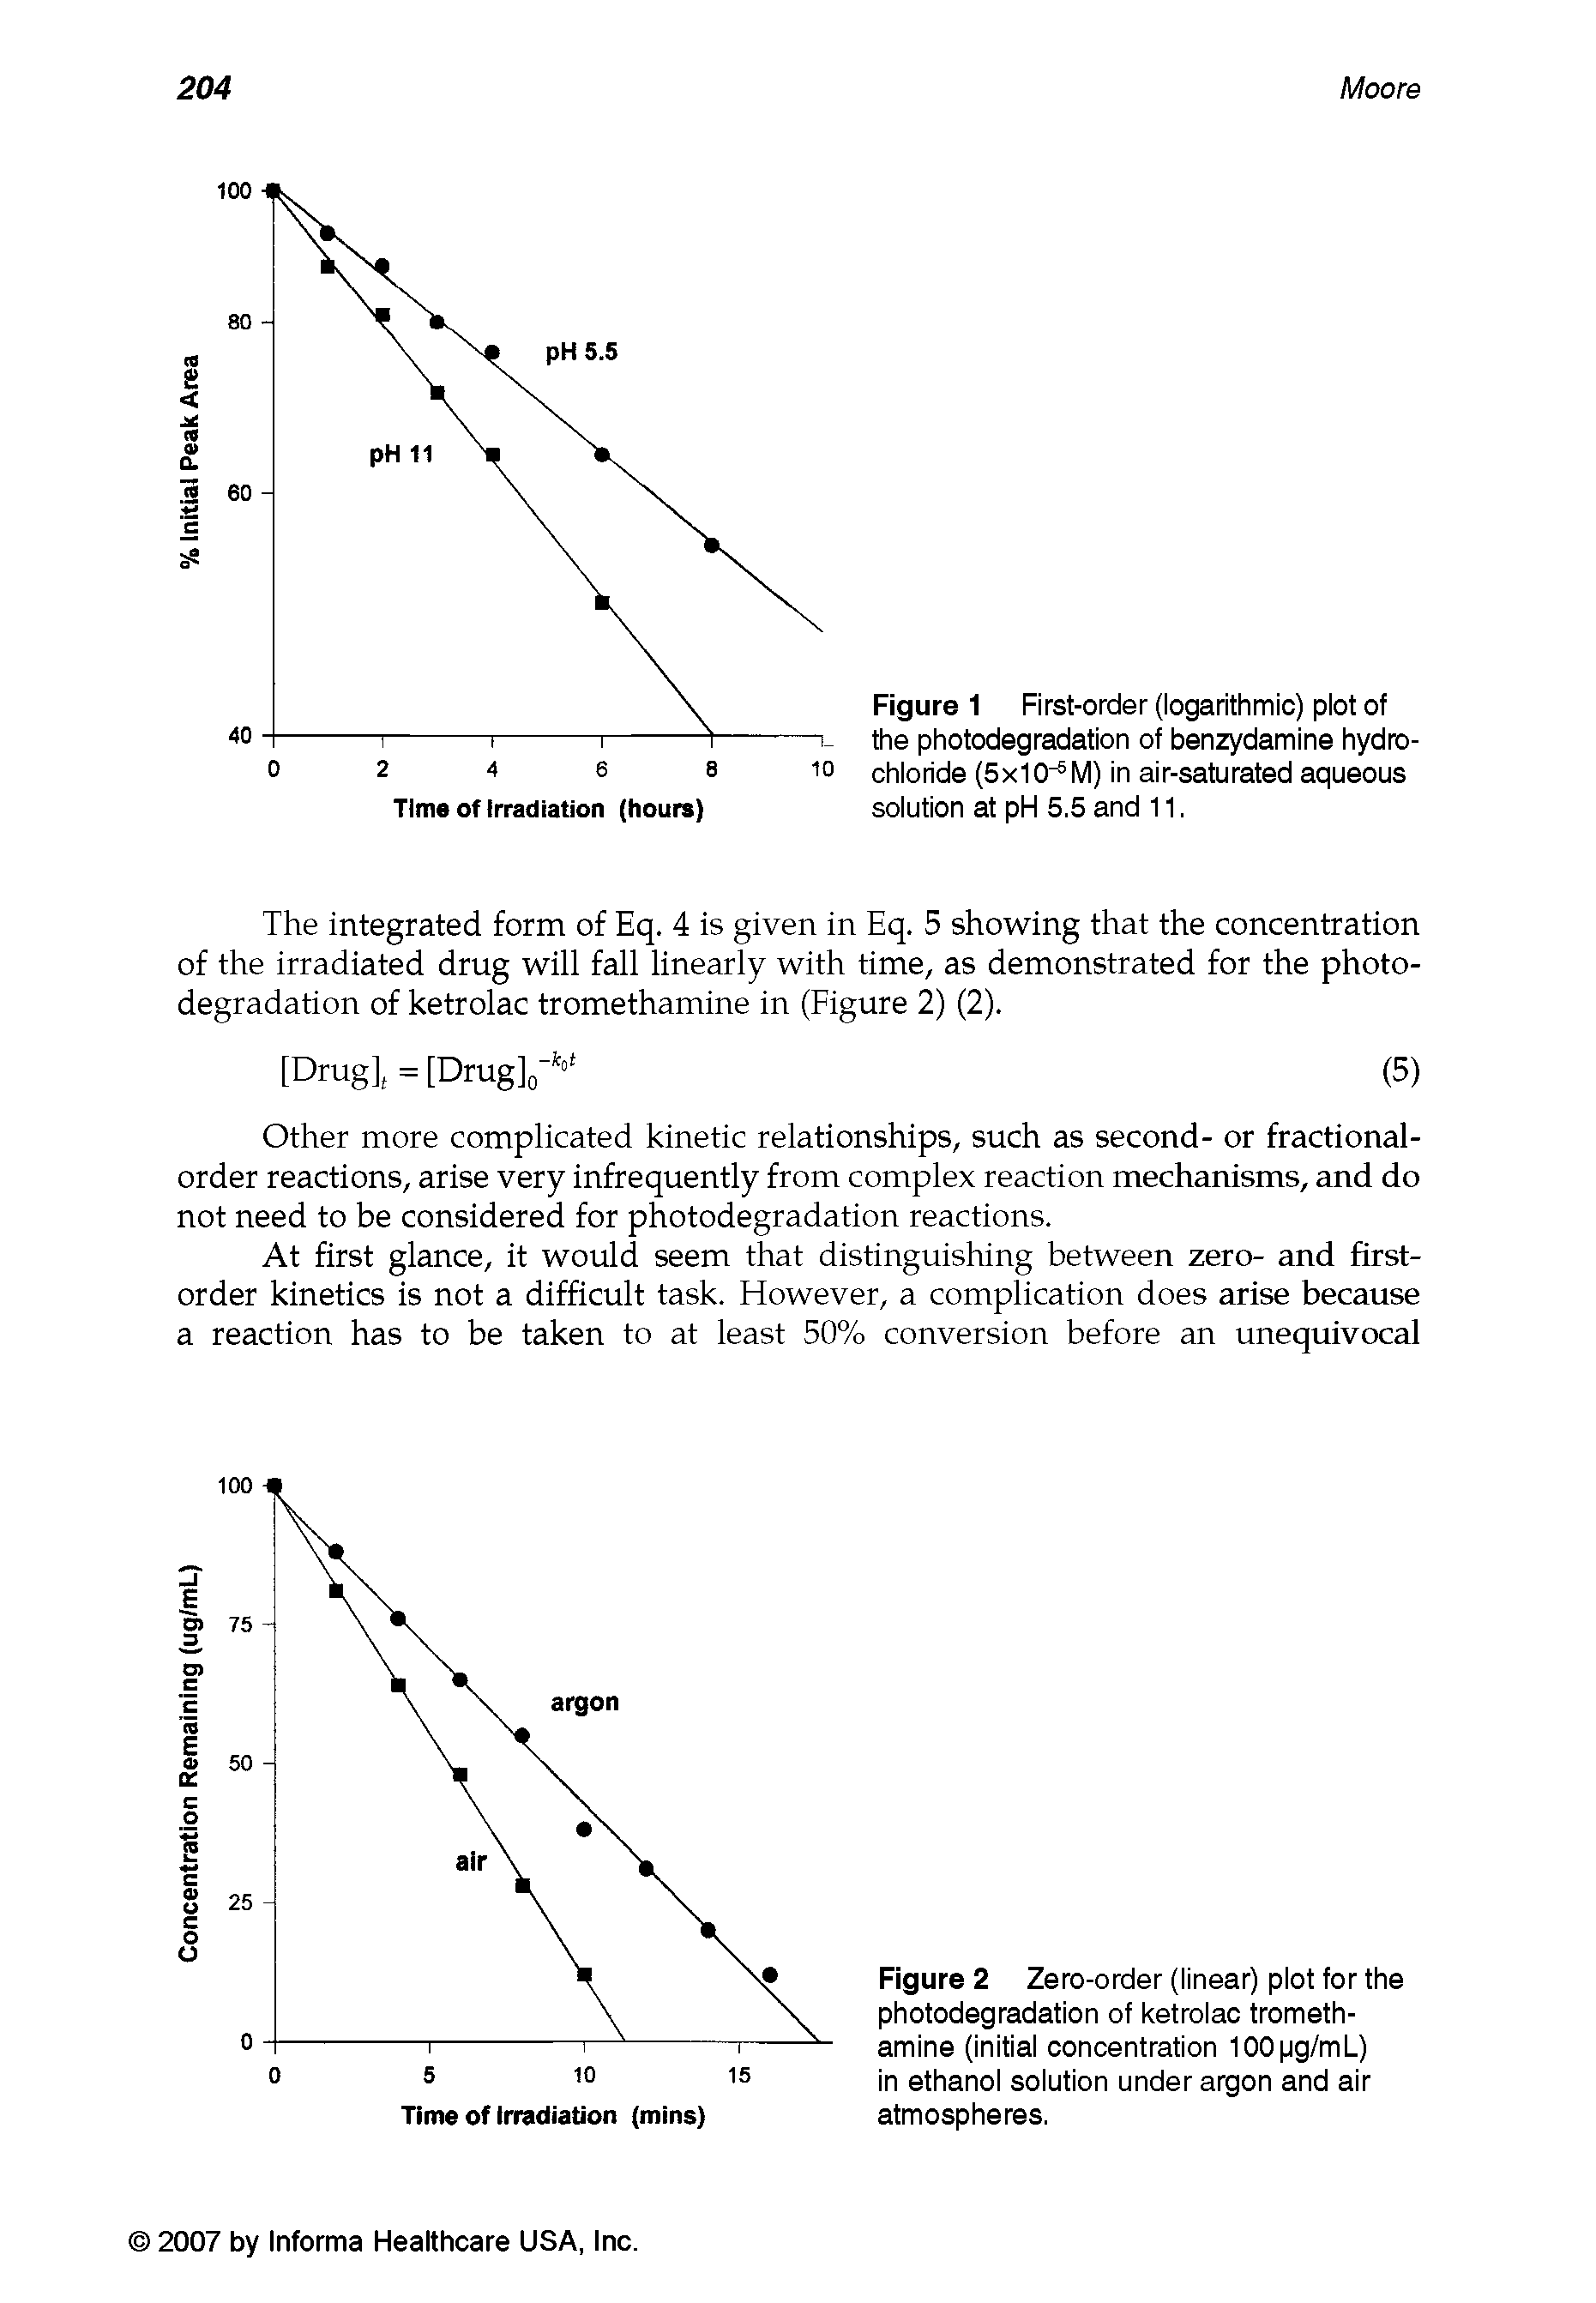 Figure 1 First-order (logarithmic) plot of the photodegradation of benzydamine hydrochloride (5x10" M) in air-saturated aqueous solution at pH 5.5 and 11.